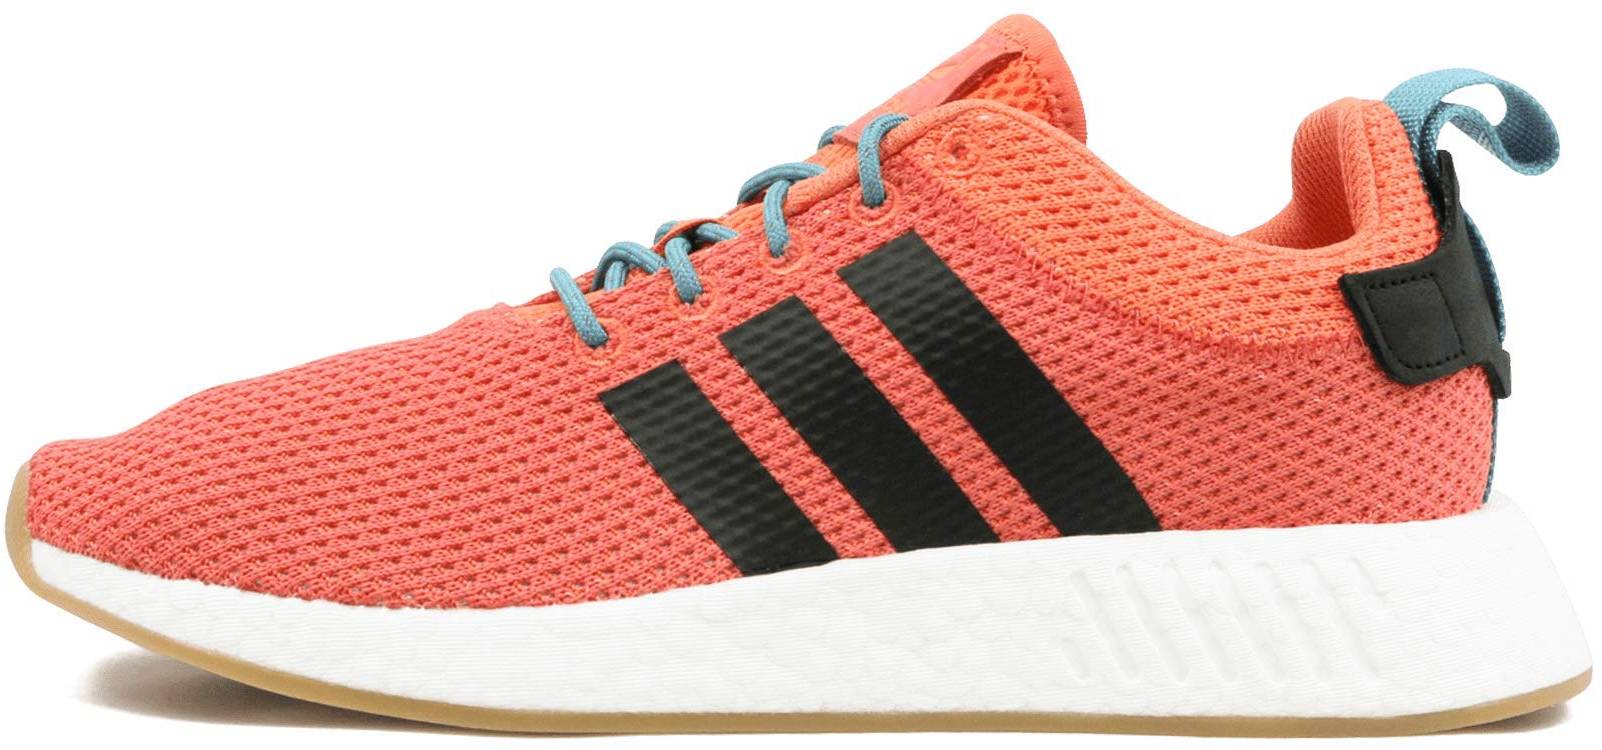 Save 60% on Adidas NMD Sneakers (29 